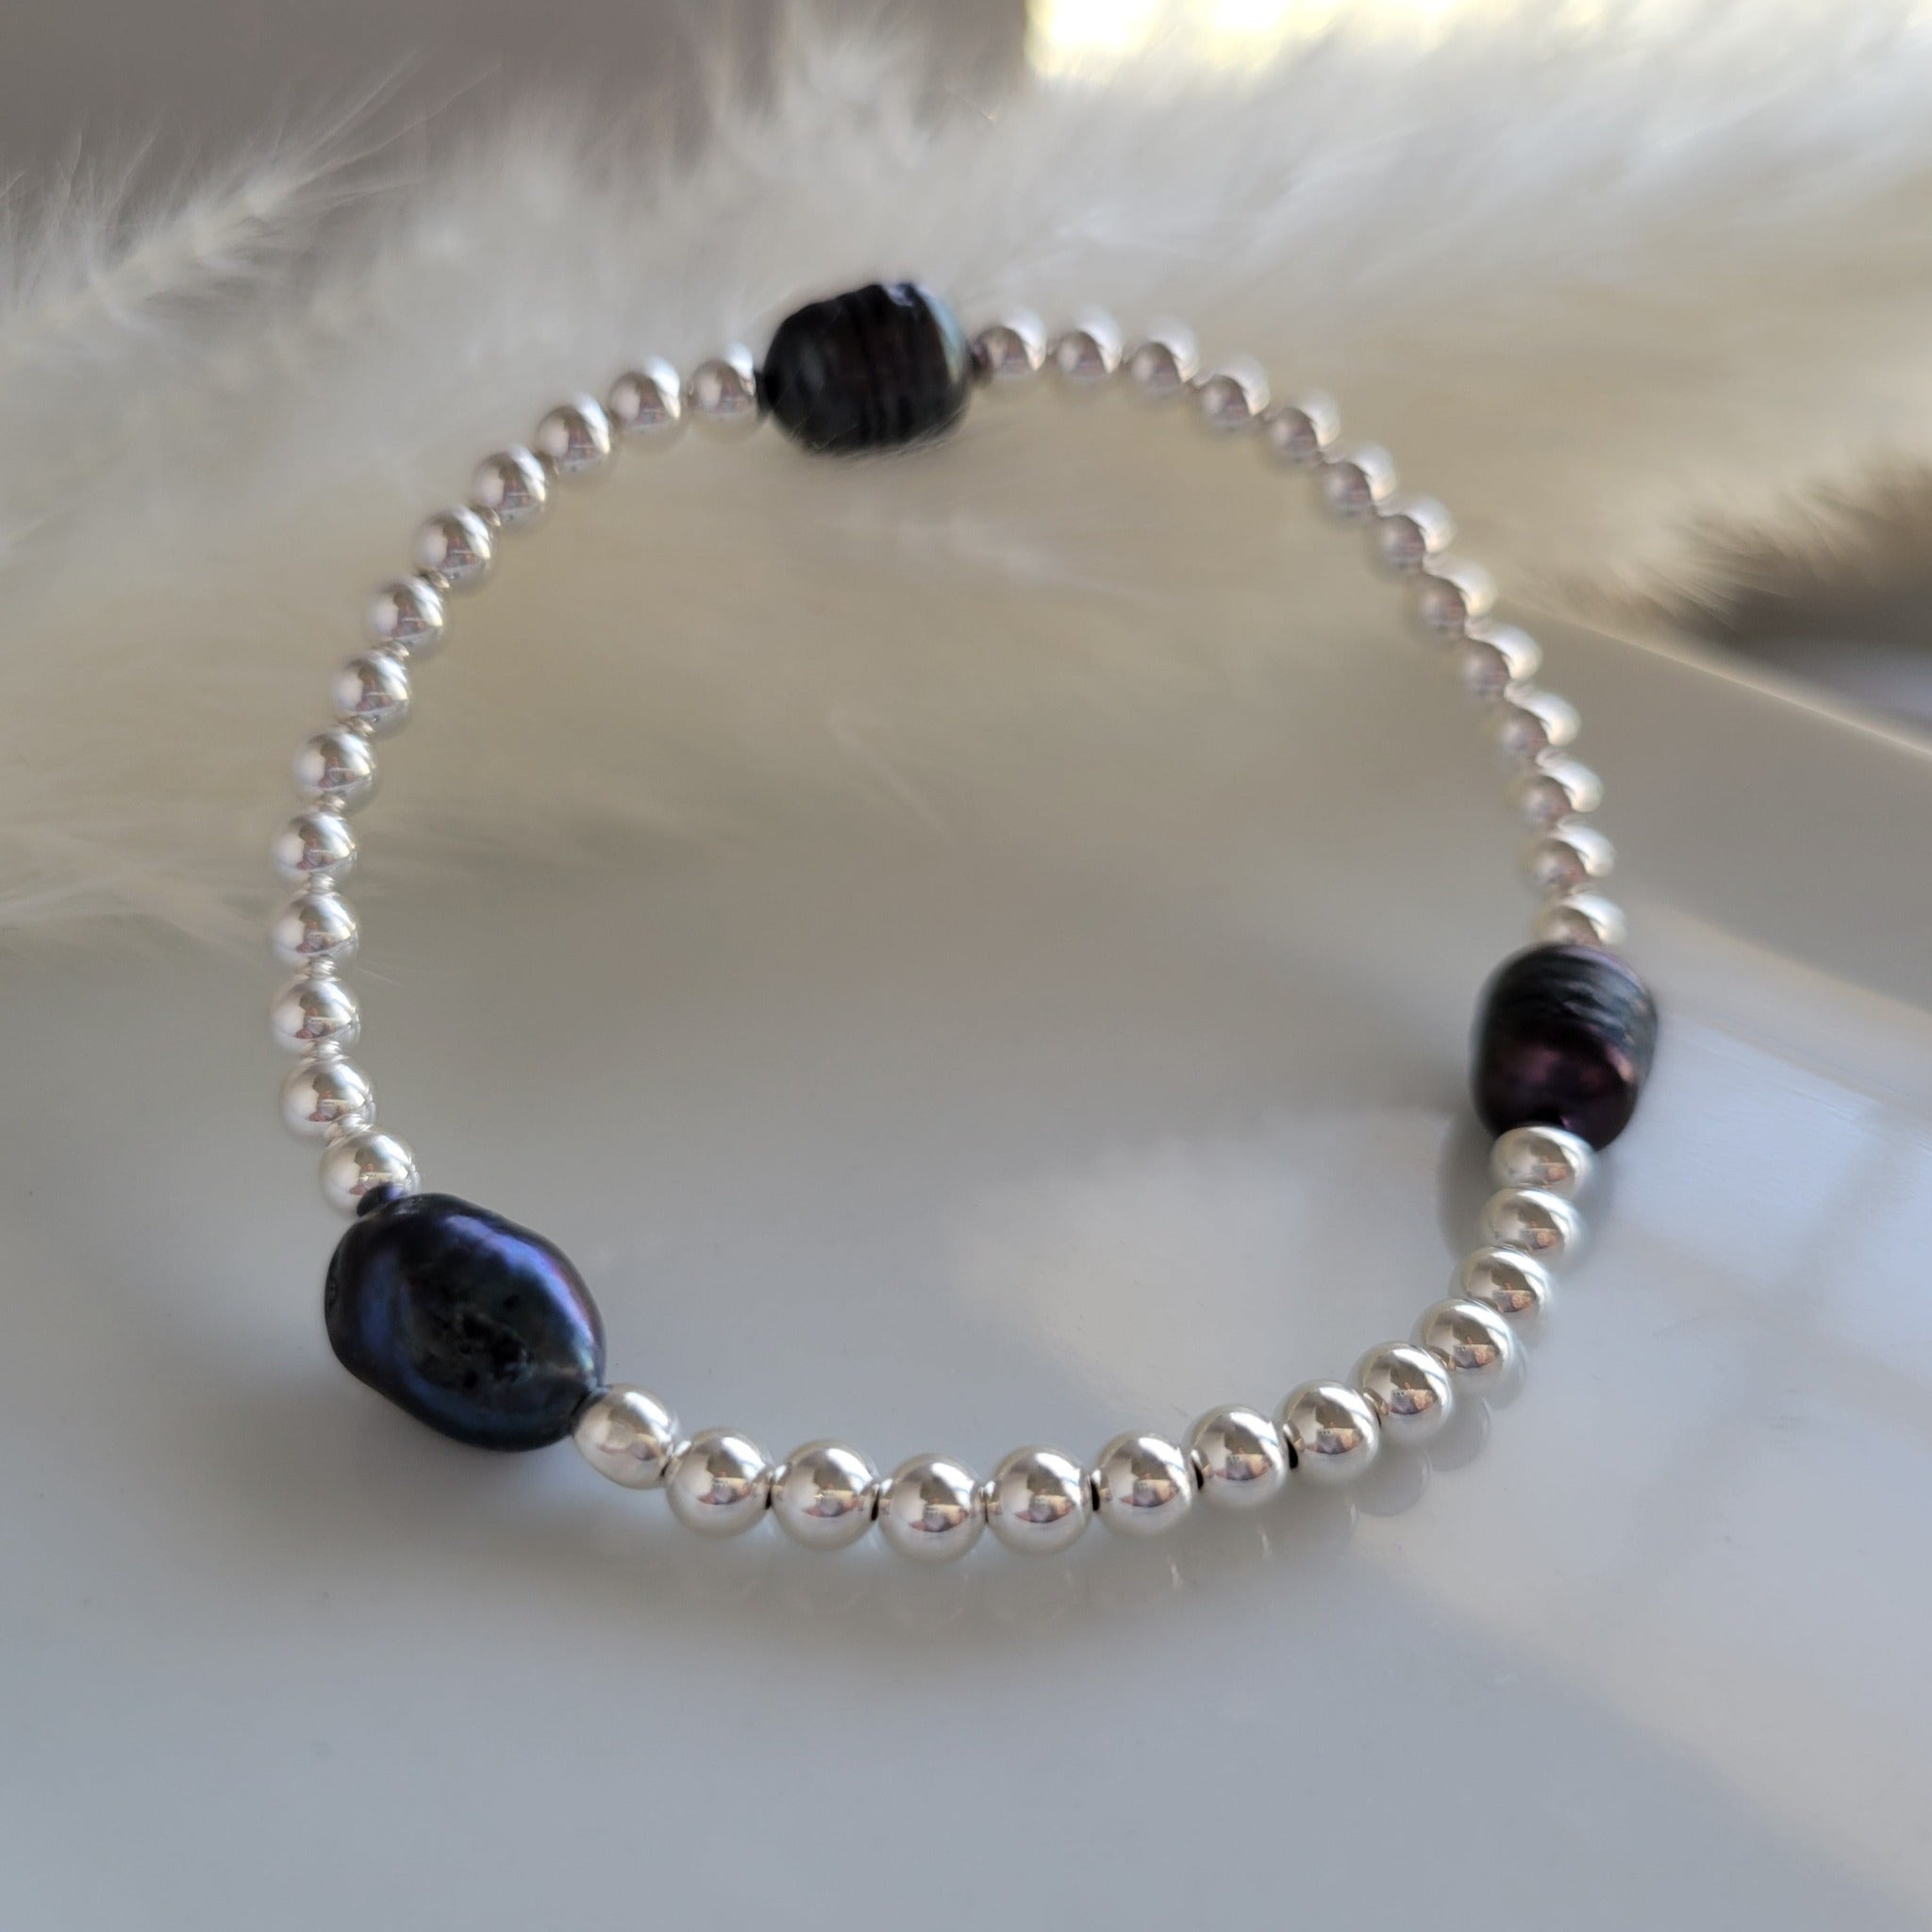 Beaded and Raw Pearl Layering Bracelet - Sterling or Gold - Black or White Pearls